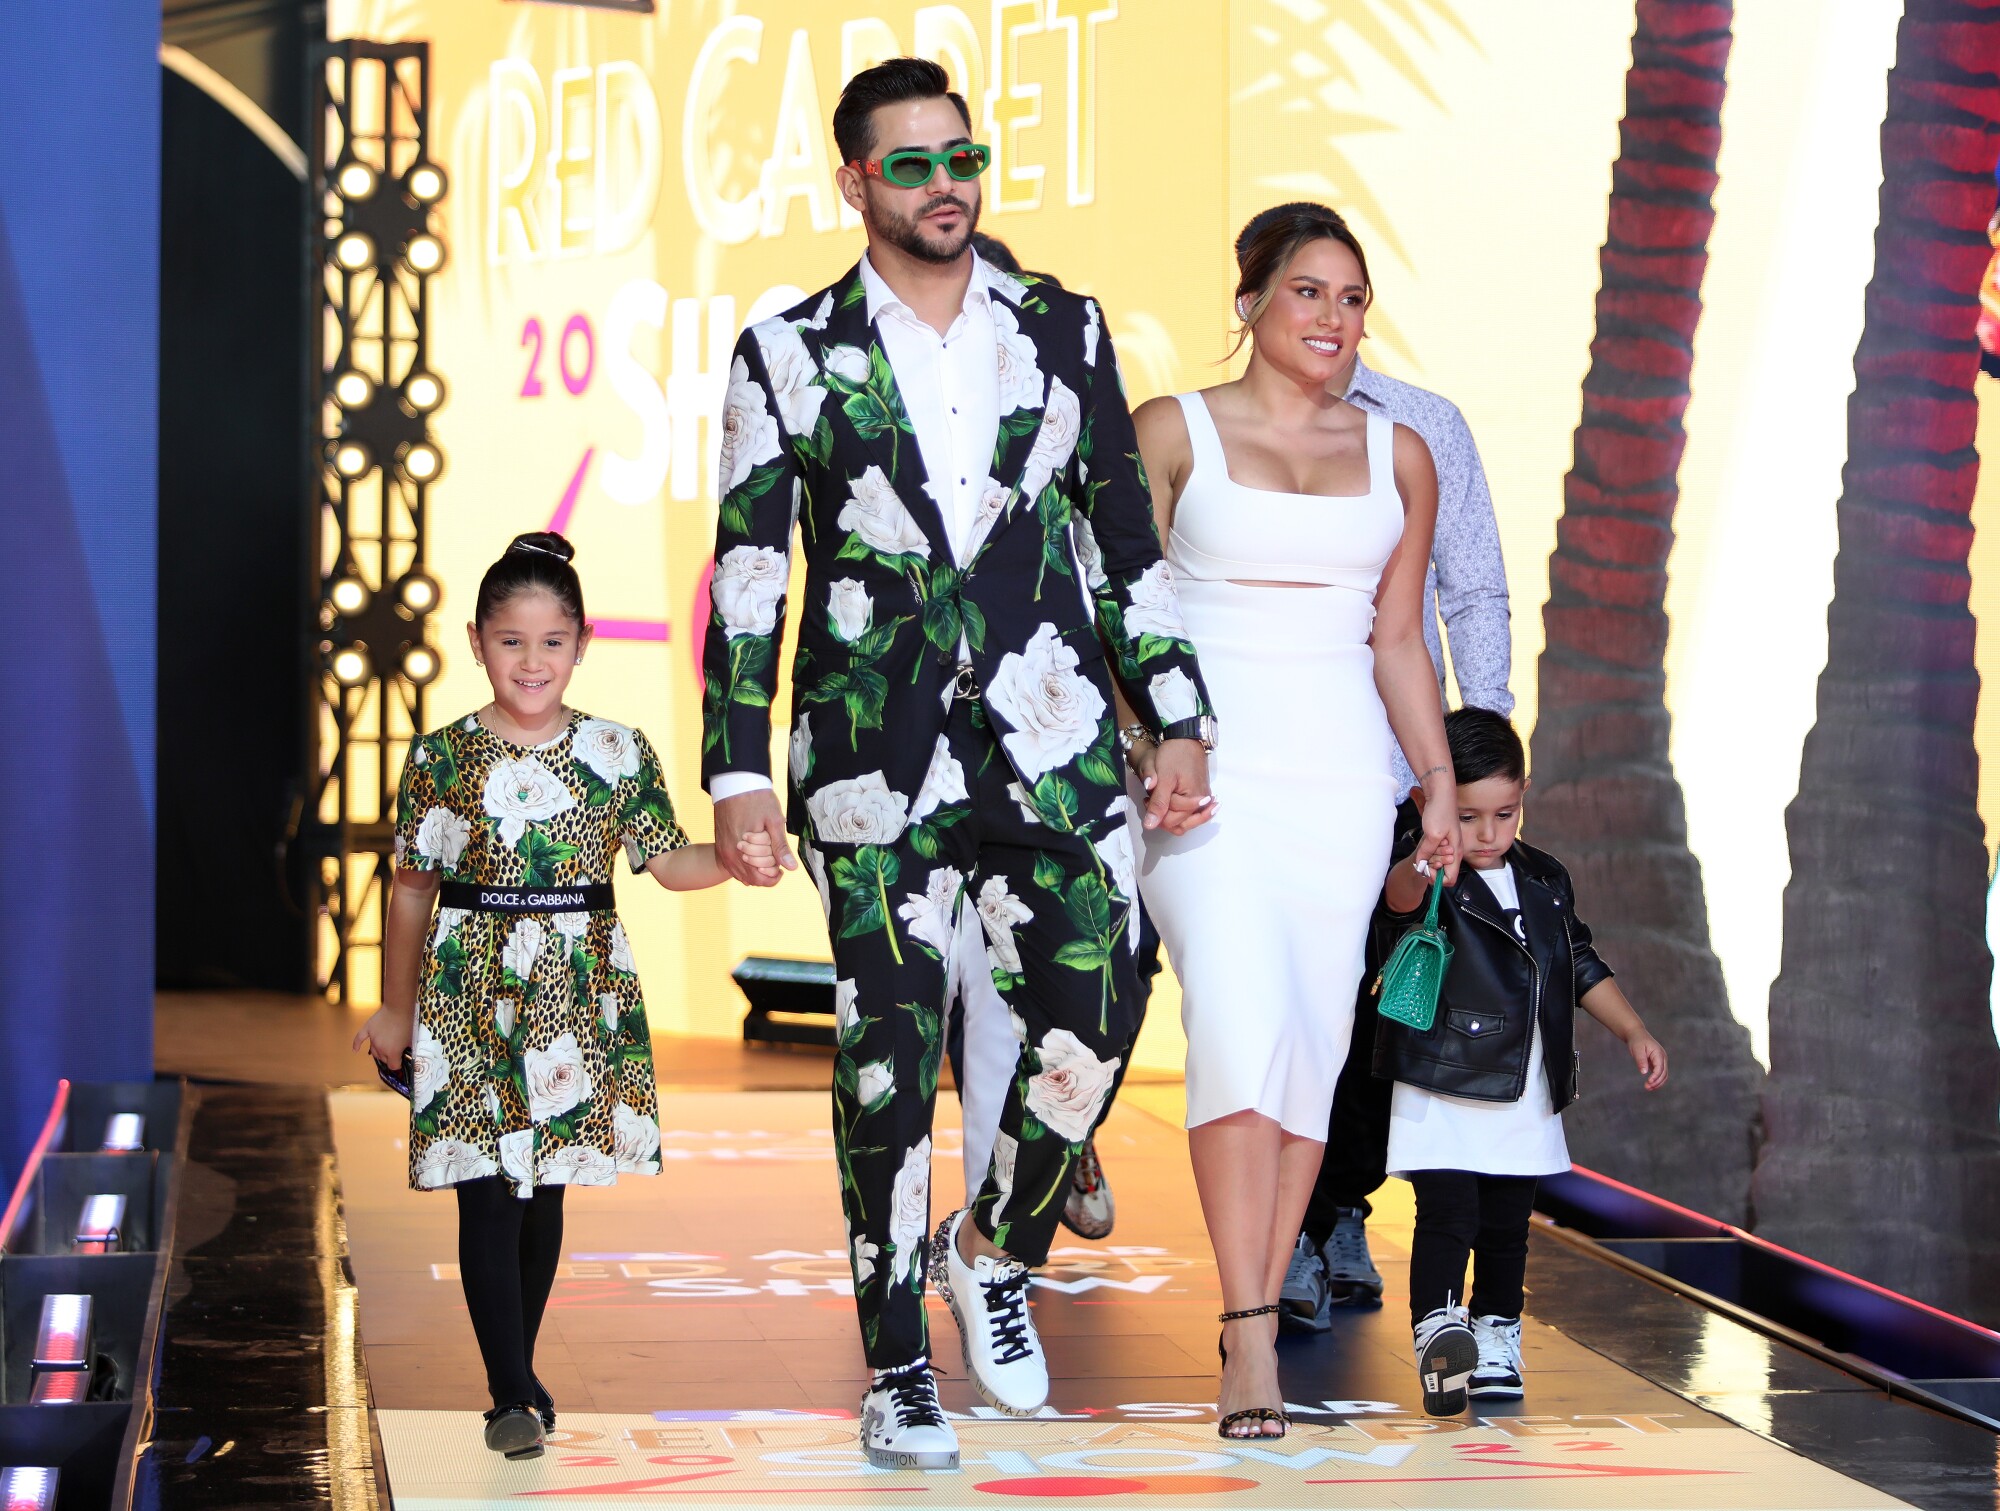 Texas Rangers pitcher Martin Perez and family arrive at the 2022 MLB All-Star Game Red Carpet Show.